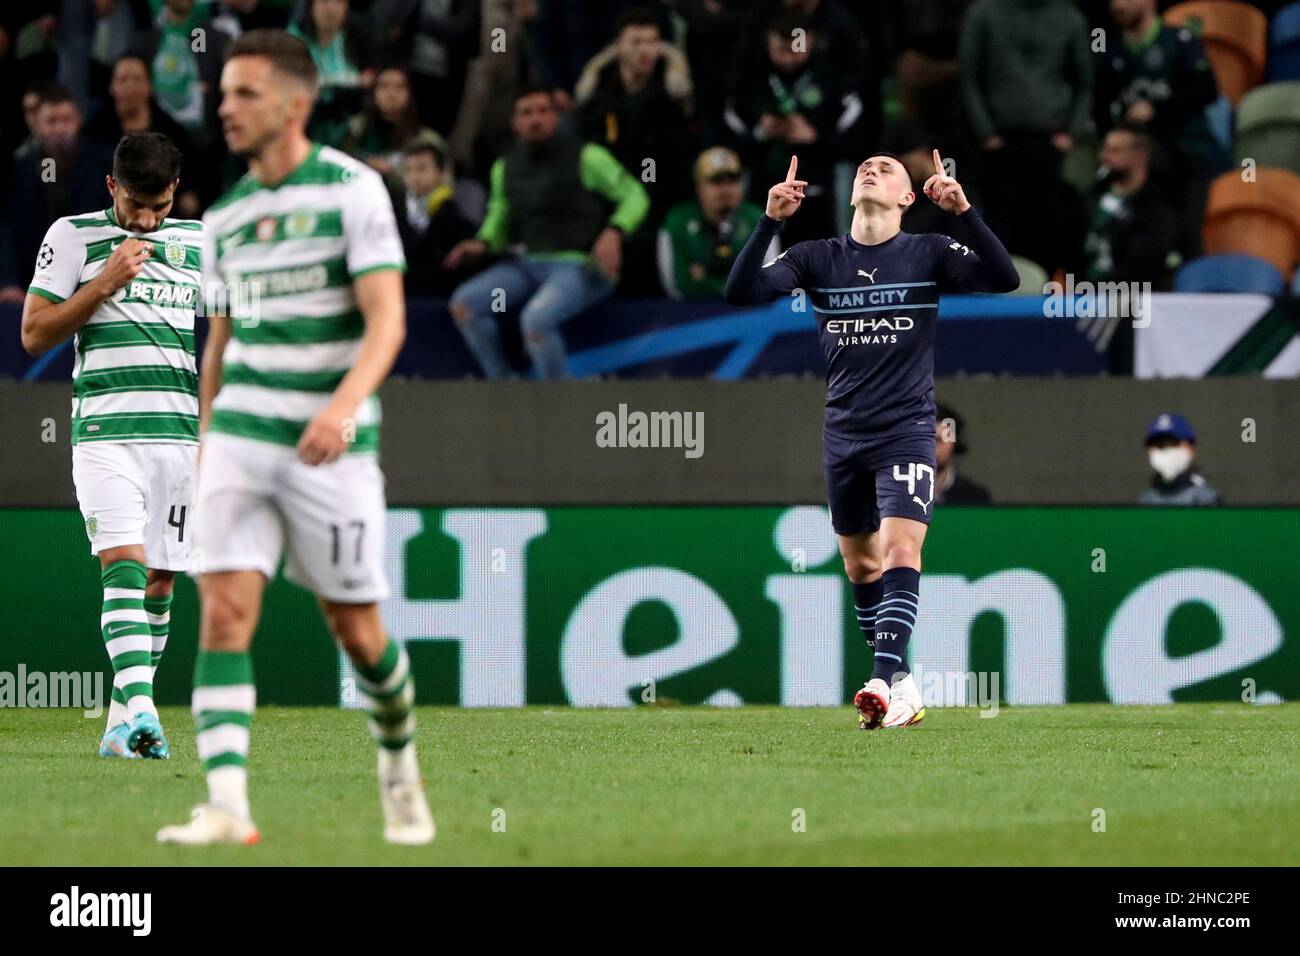 Lisbon, Portugal. 15th Feb, 2022. Phil Foden of Manchester City (R) celebrates after scoring a goal during UEFA Champions League round of 16 first leg match between Sporting CP and Manchester City at Alvalade stadium in Lisbon, Portugal, on Feb. 15, 2022. Credit: Pedro Fiuza/Xinhua/Alamy Live News Stock Photo